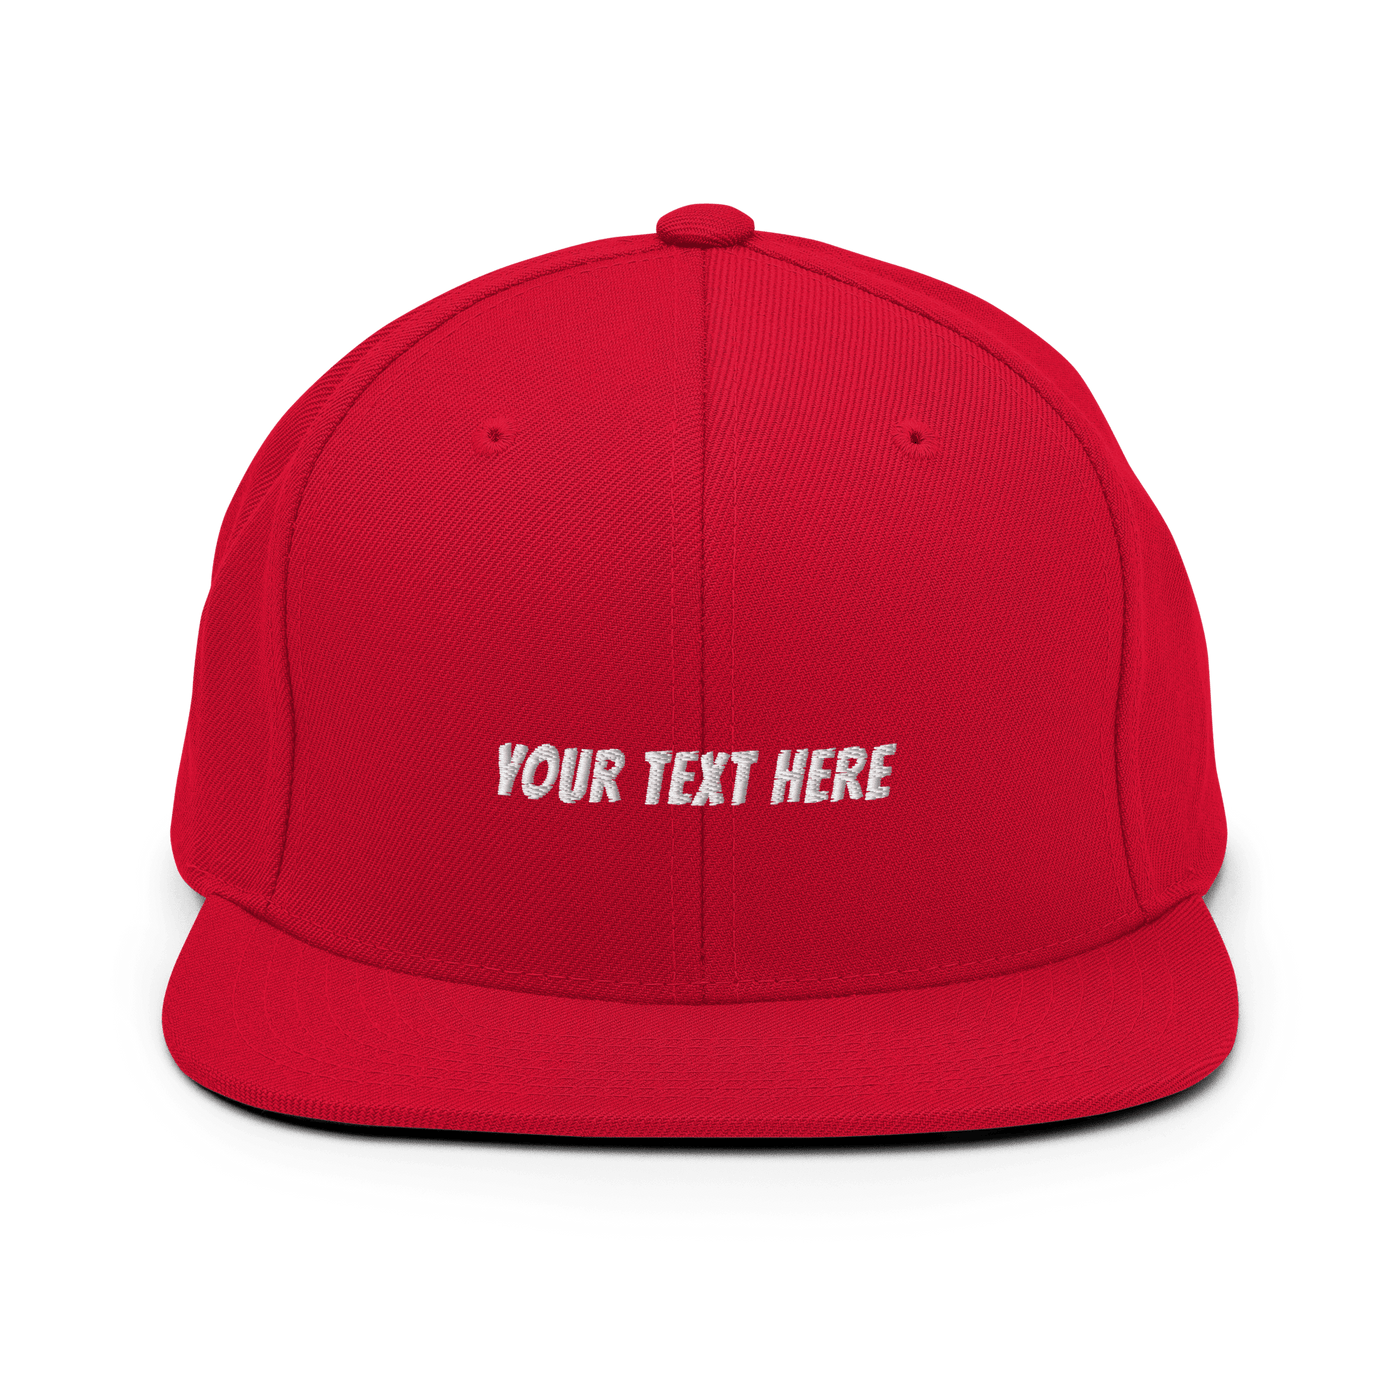 Customize Your Own Snapback Hat - Banger Font - Red - - Just Another Cap Store